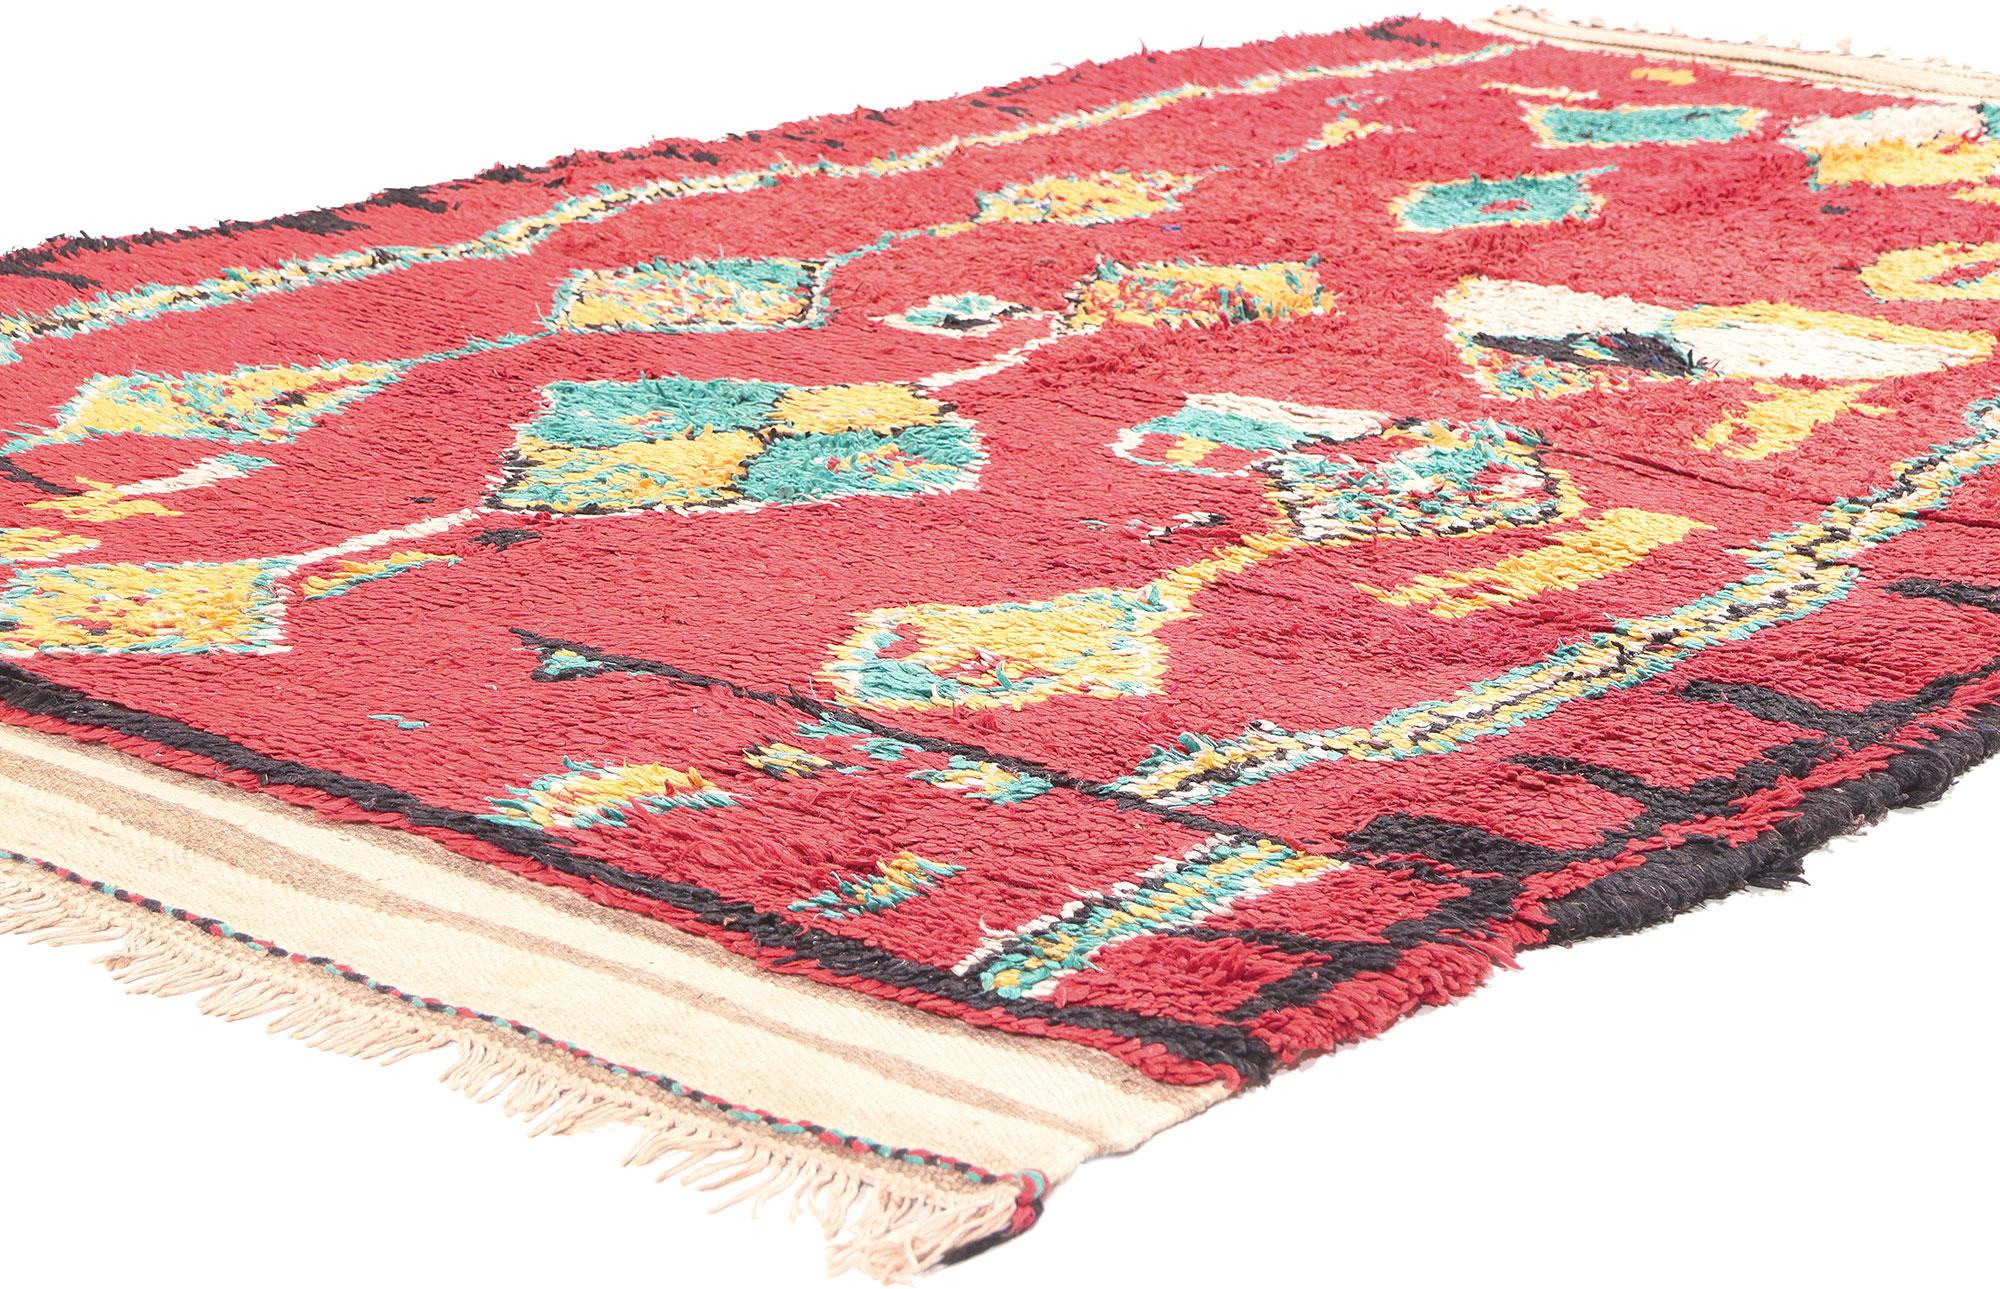 20484 Vintage Red Moroccan Rug, 04’10 x 07’00. In the intricate weave of this hand-knotted wool vintage red Moroccan rug, a profusion of diamonds and confetti-like sprinkles unfolds, framed by a ladder motif and vibrant colored stripes. The